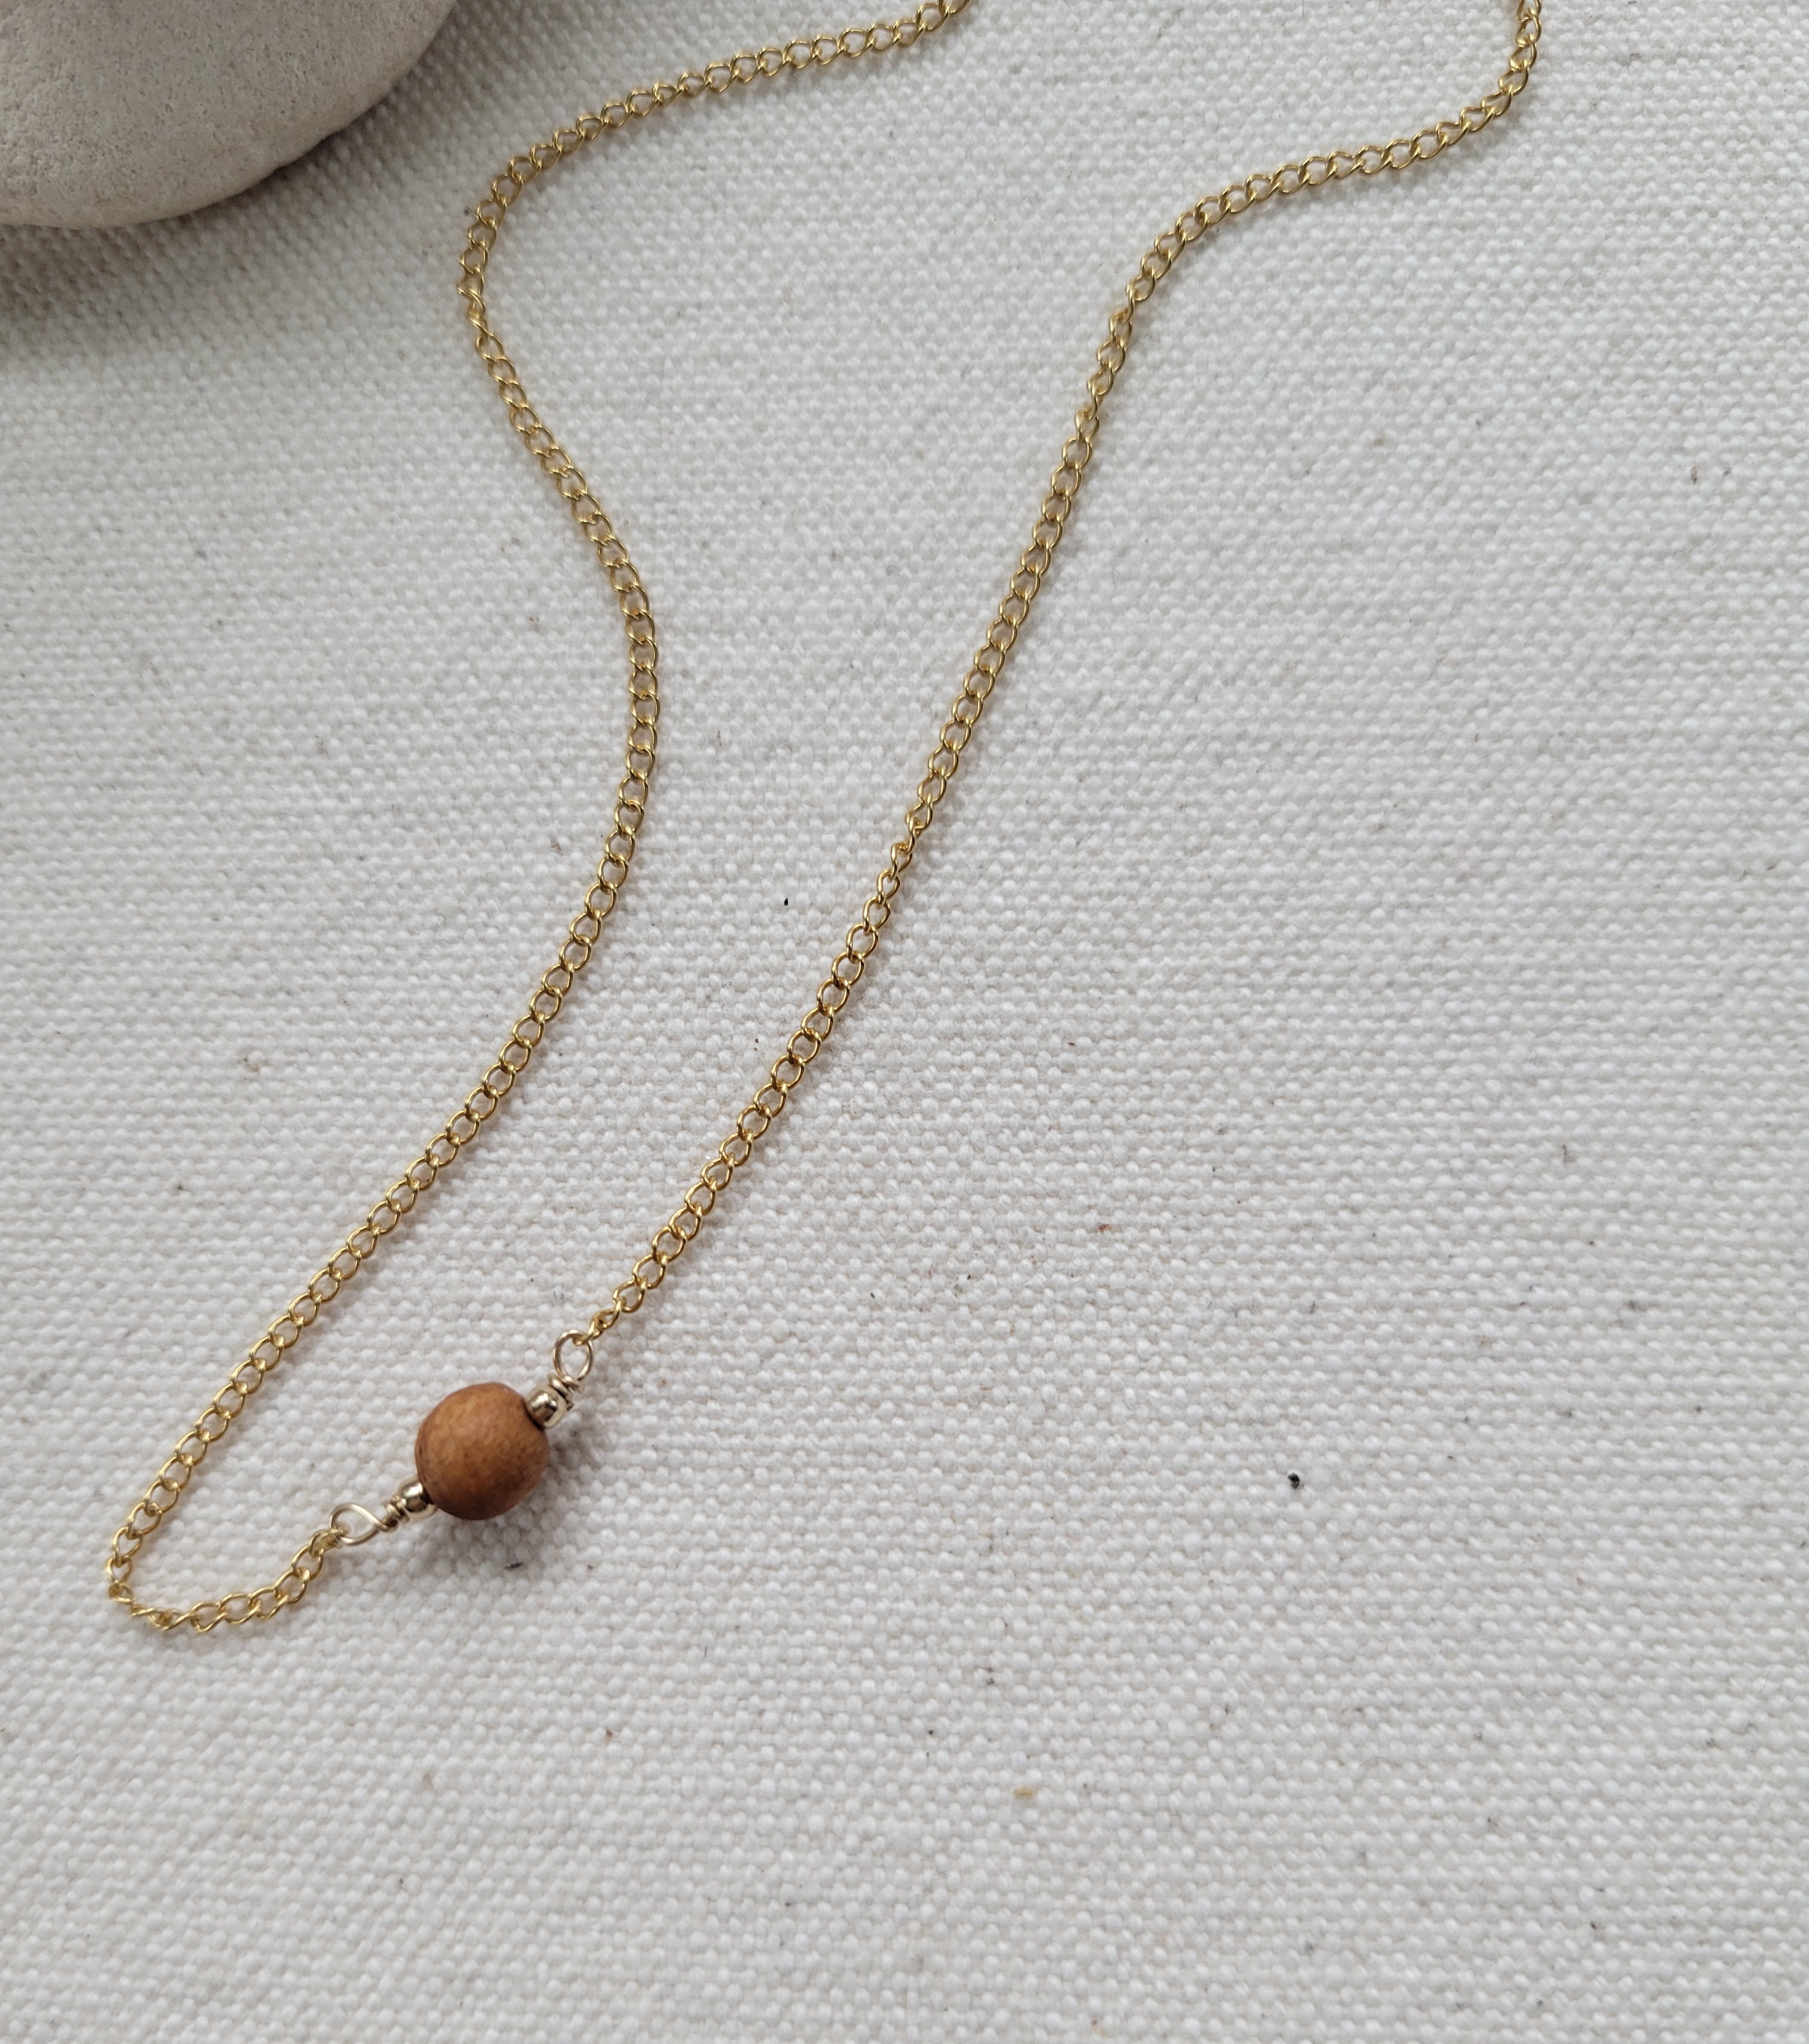 The Cherrywood Nugget Gold Necklace